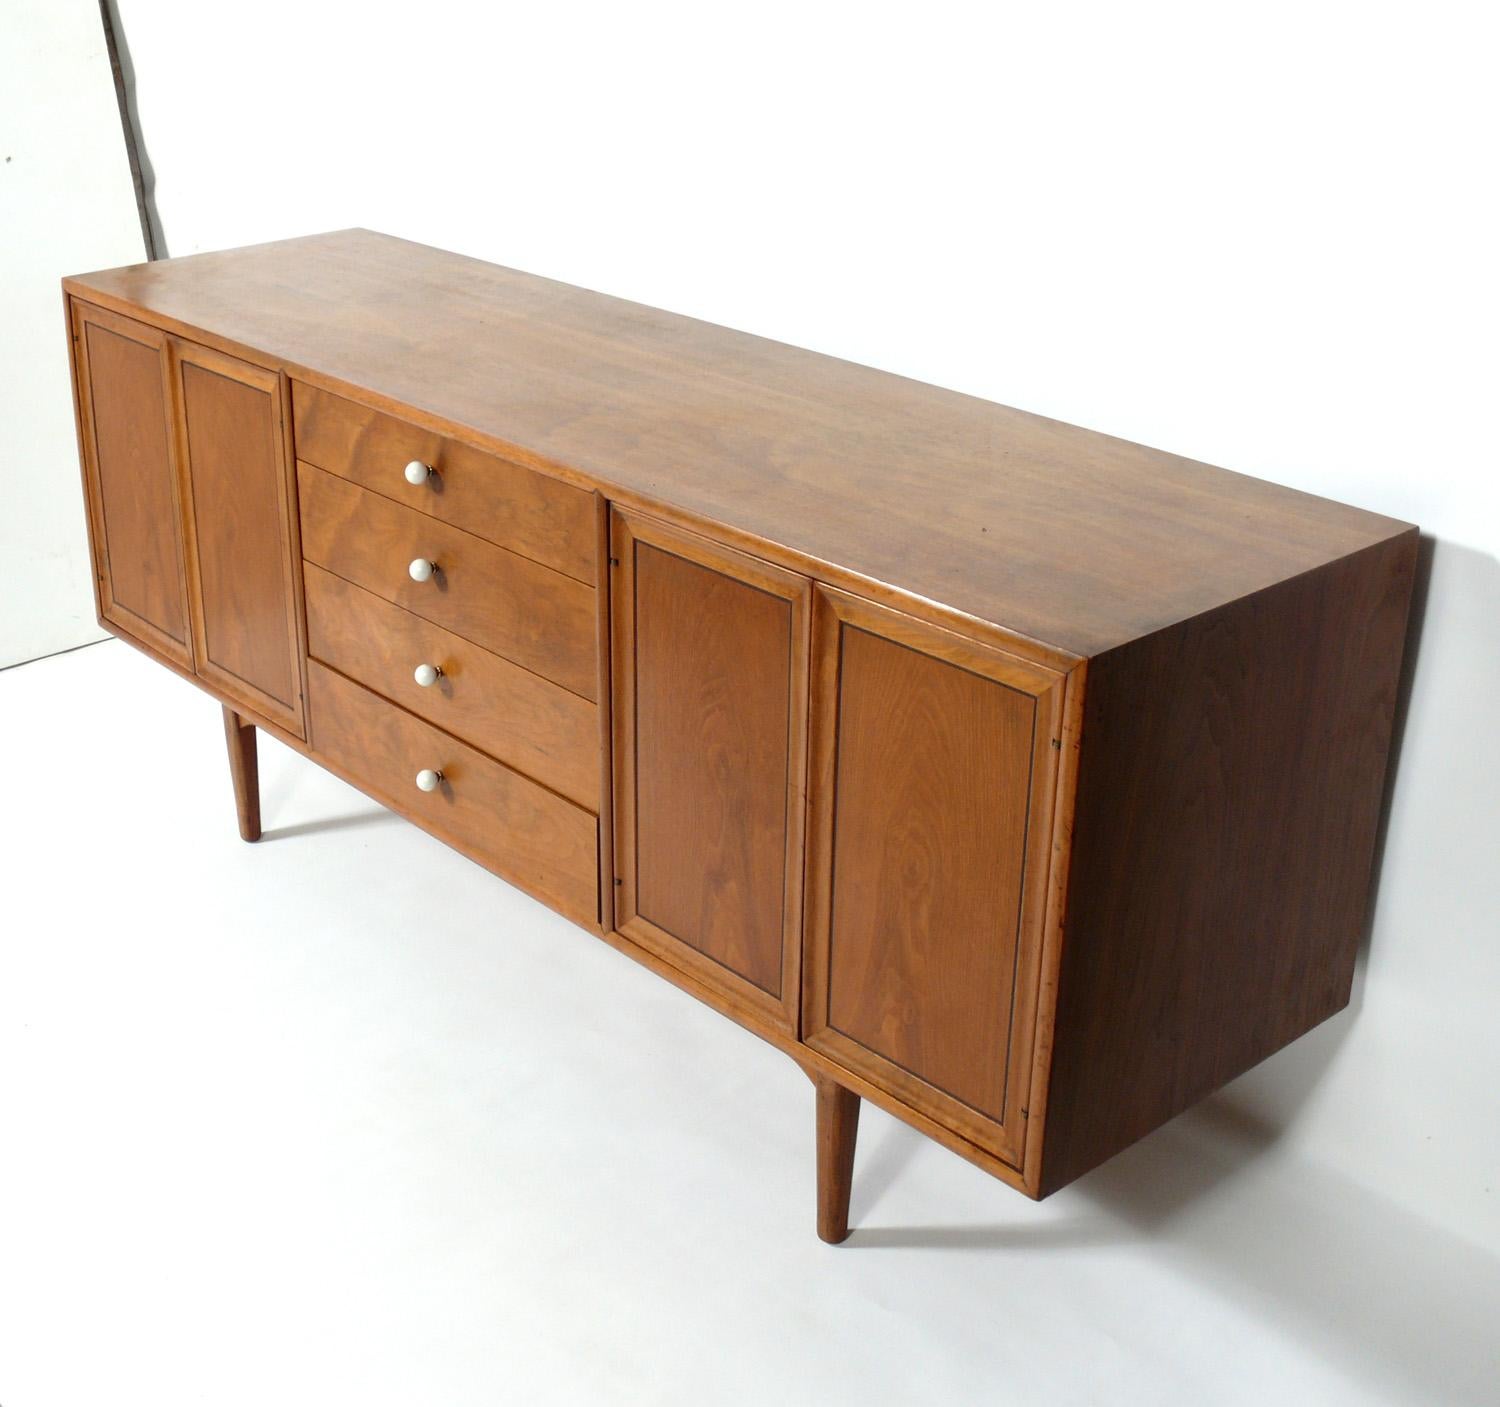 Mid-Century Modern Credenza or Chest, designed by Kipp Stewart for the Declaration line for Drexel, American, circa 1960s. Beautiful graining to the walnut. This piece is a versatile size and can be used as a credenza, media cabinet or bar in a